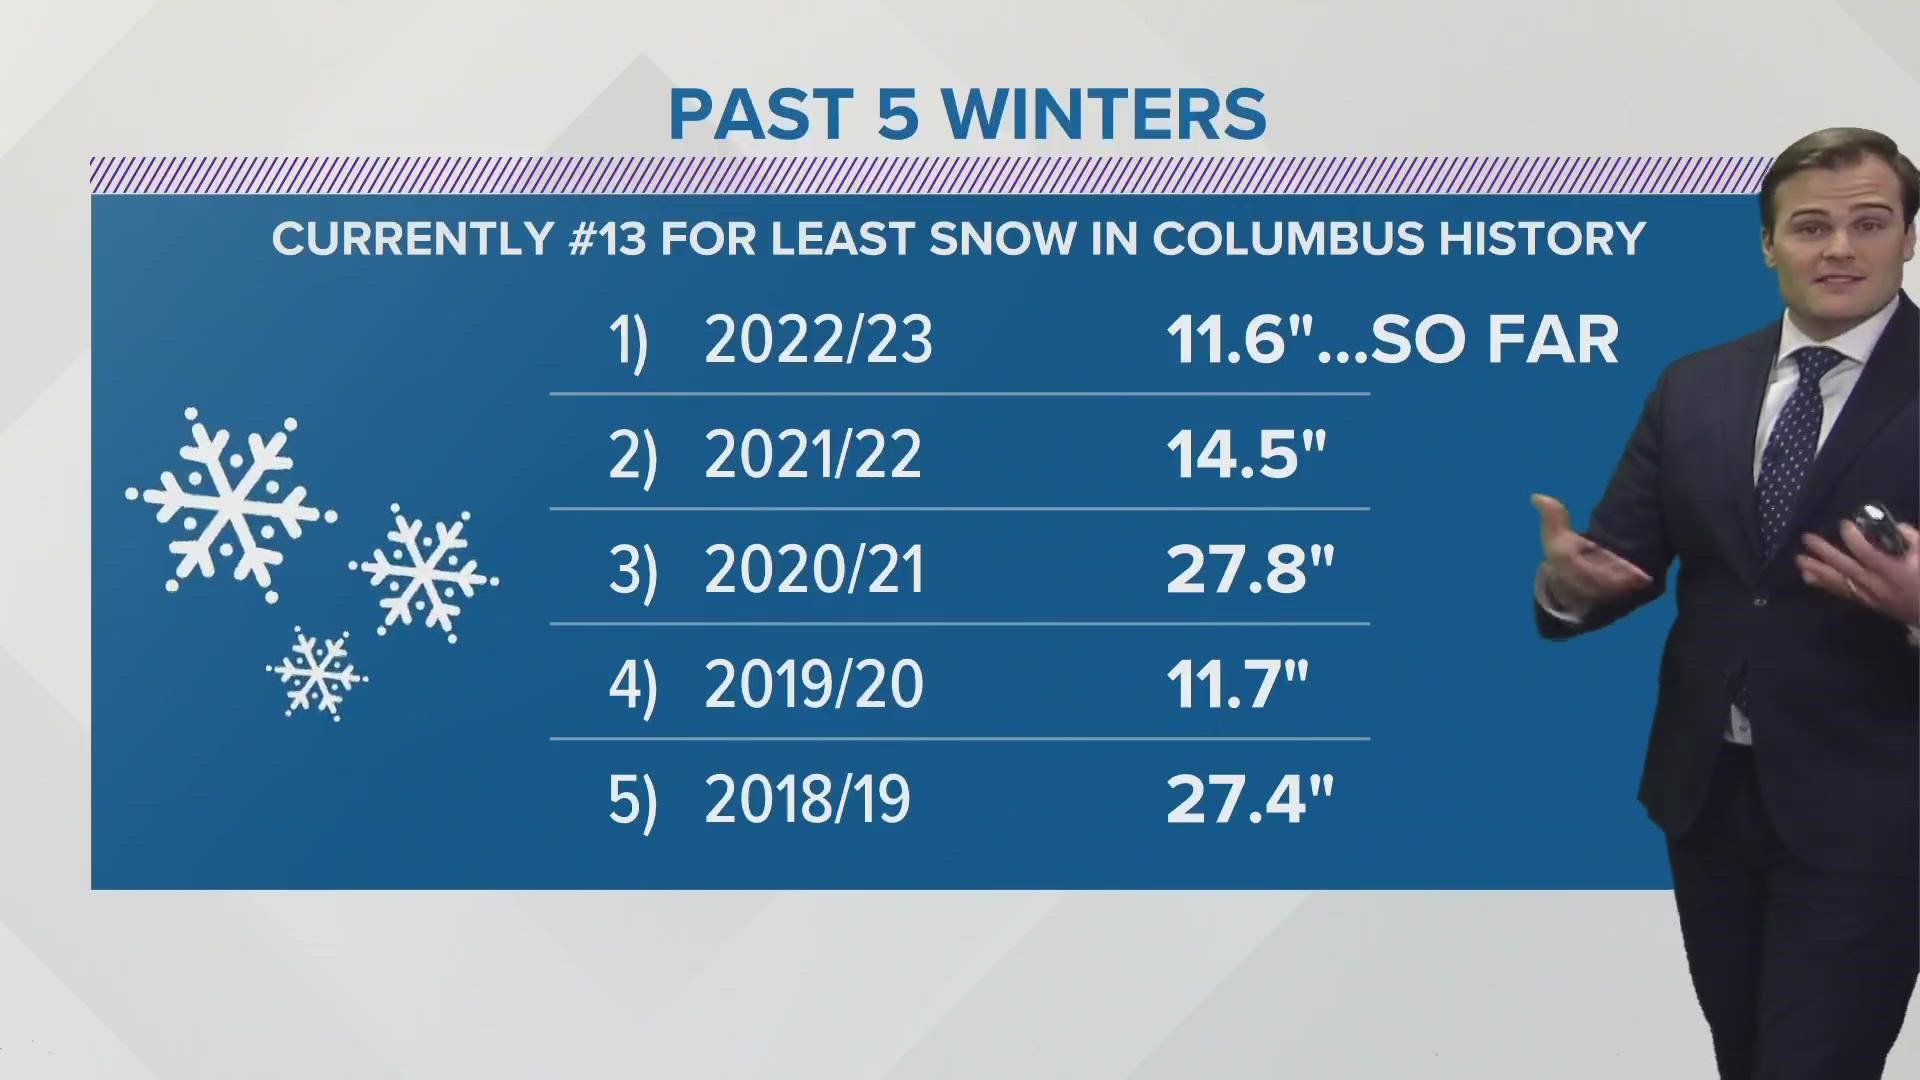 This winter has been the second-warmest.